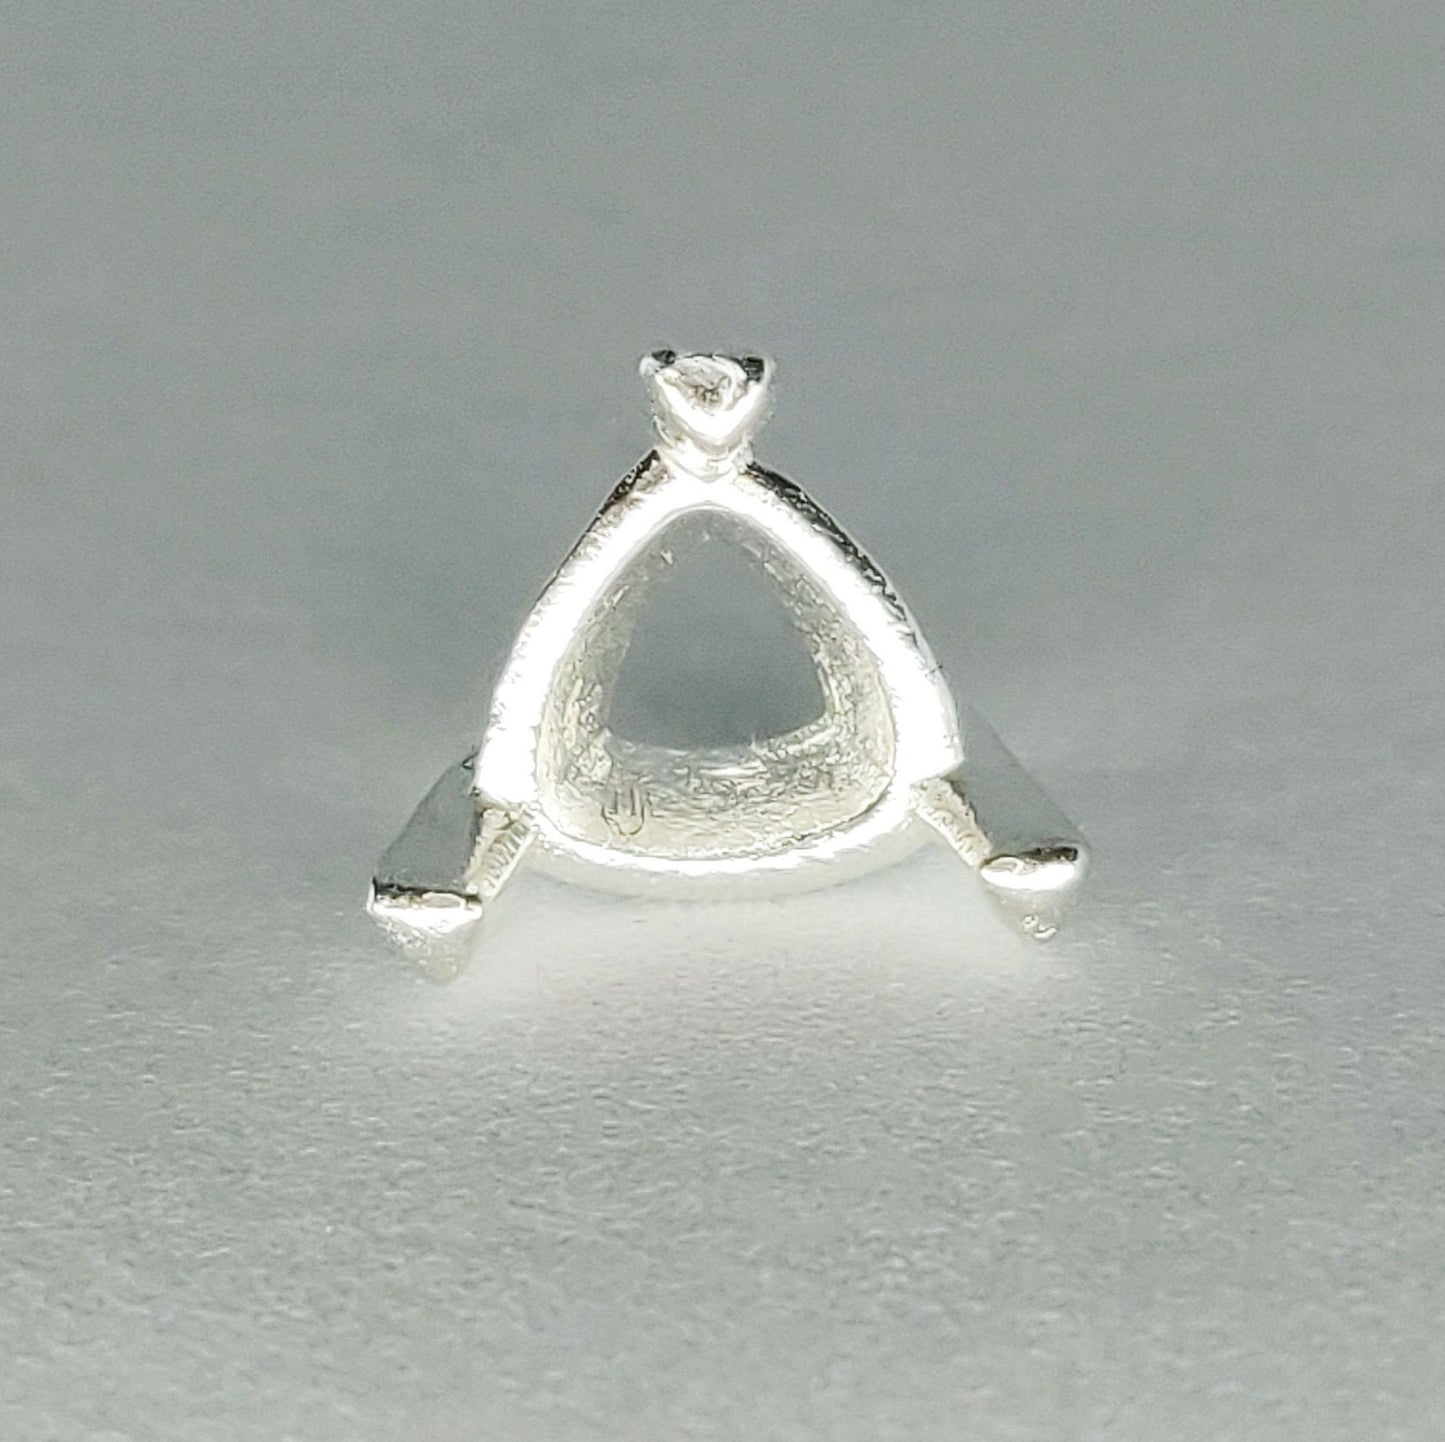 Top view of a silver trillion prong setting on a white background.